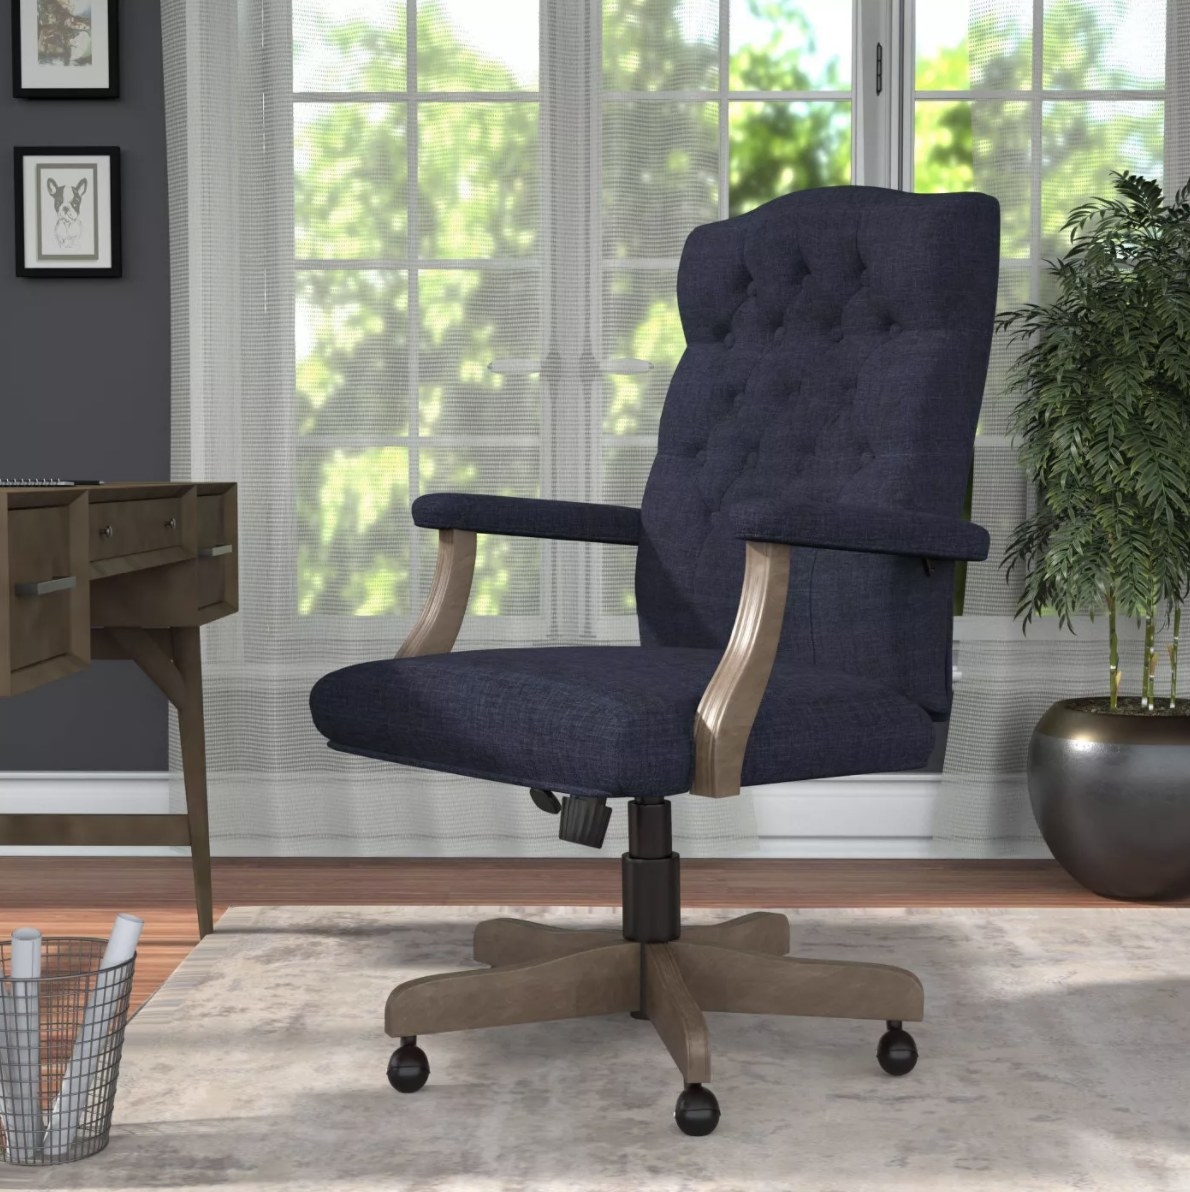 The navy blue fabric chair with wooden detailing stands out in a sunlit office